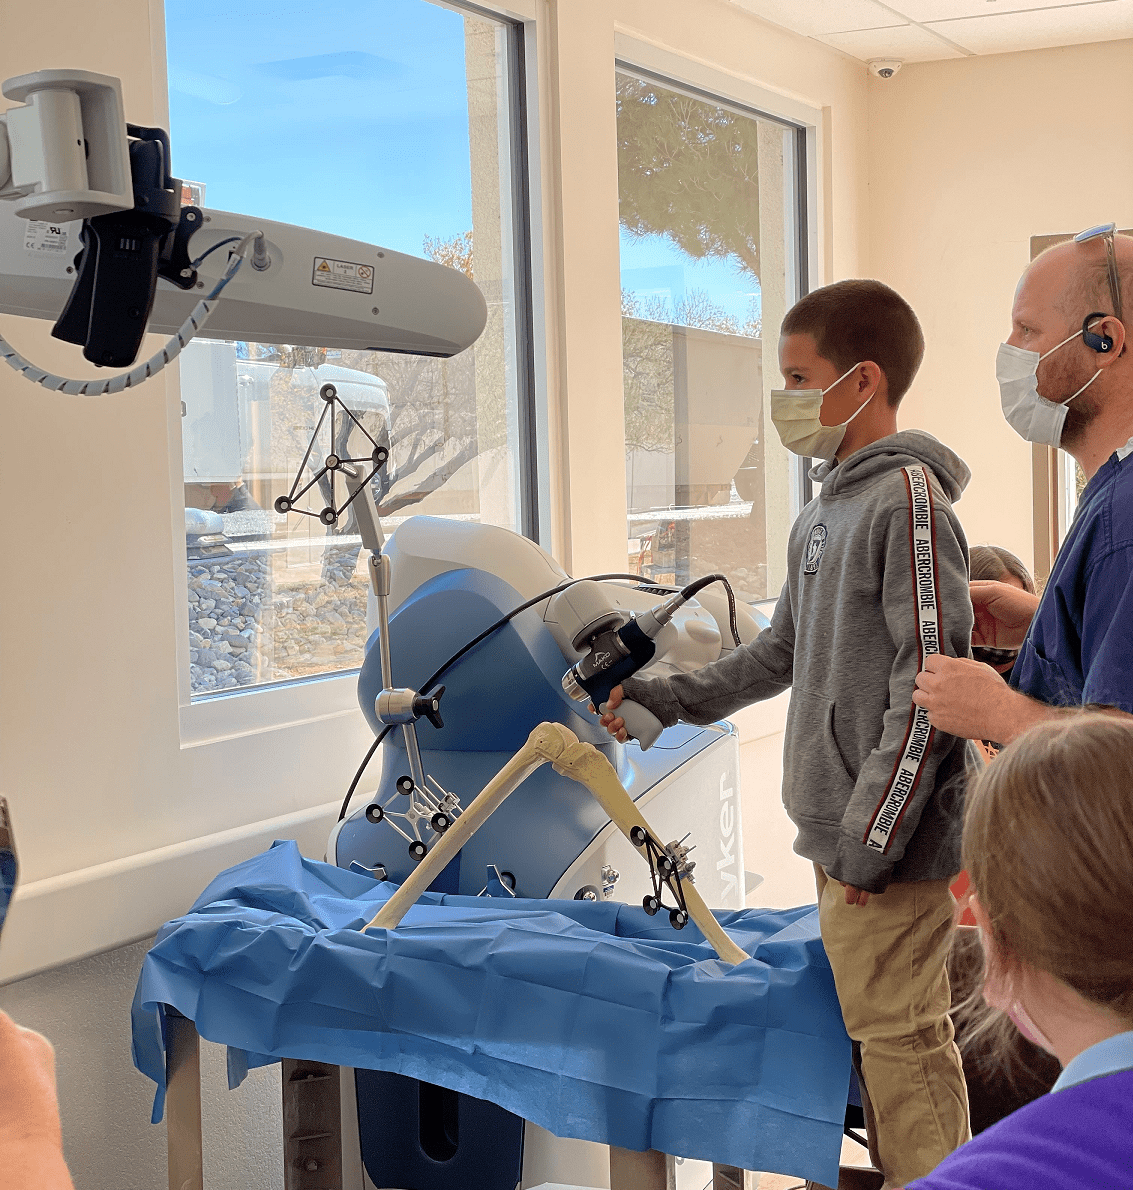 Mountain View Preparatory Names Verde Valley Medical Center’s Highly Advanced Surgical Robot